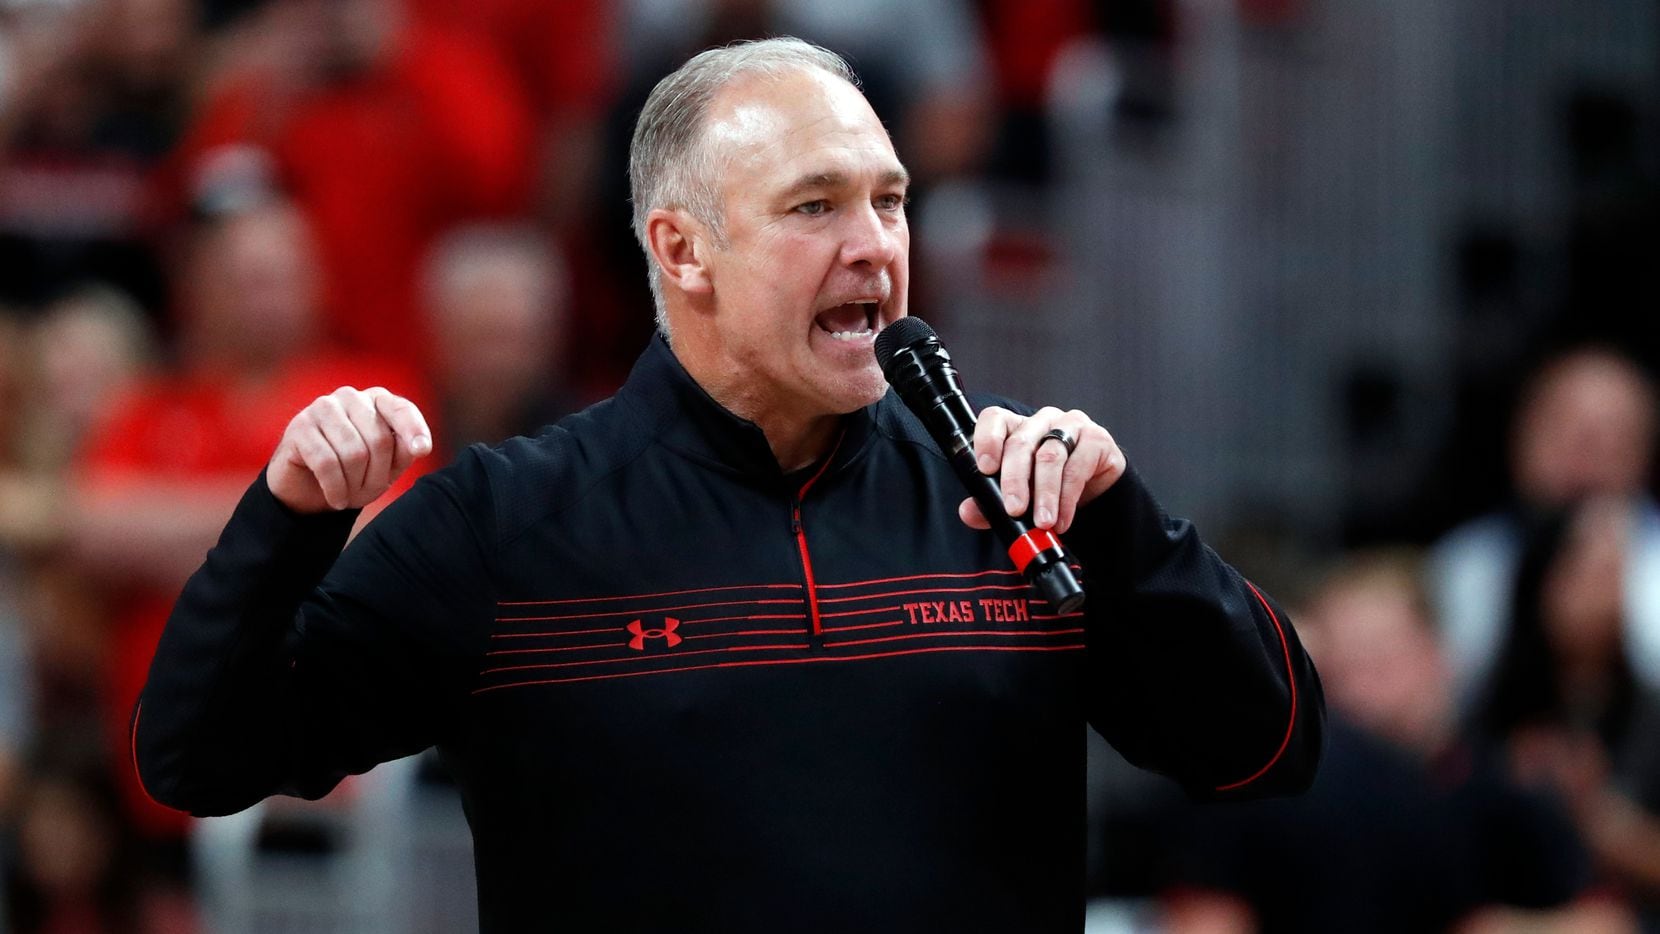 Texas Tech football coach Joey McGuire talks to the crowd during the halftime of an NCAA college basketball game against North Florida, Tuesday, Nov. 9, 2021, in Lubbock, Texas. (Brad Tollefson/Lubbock Avalanche-Journal via AP)